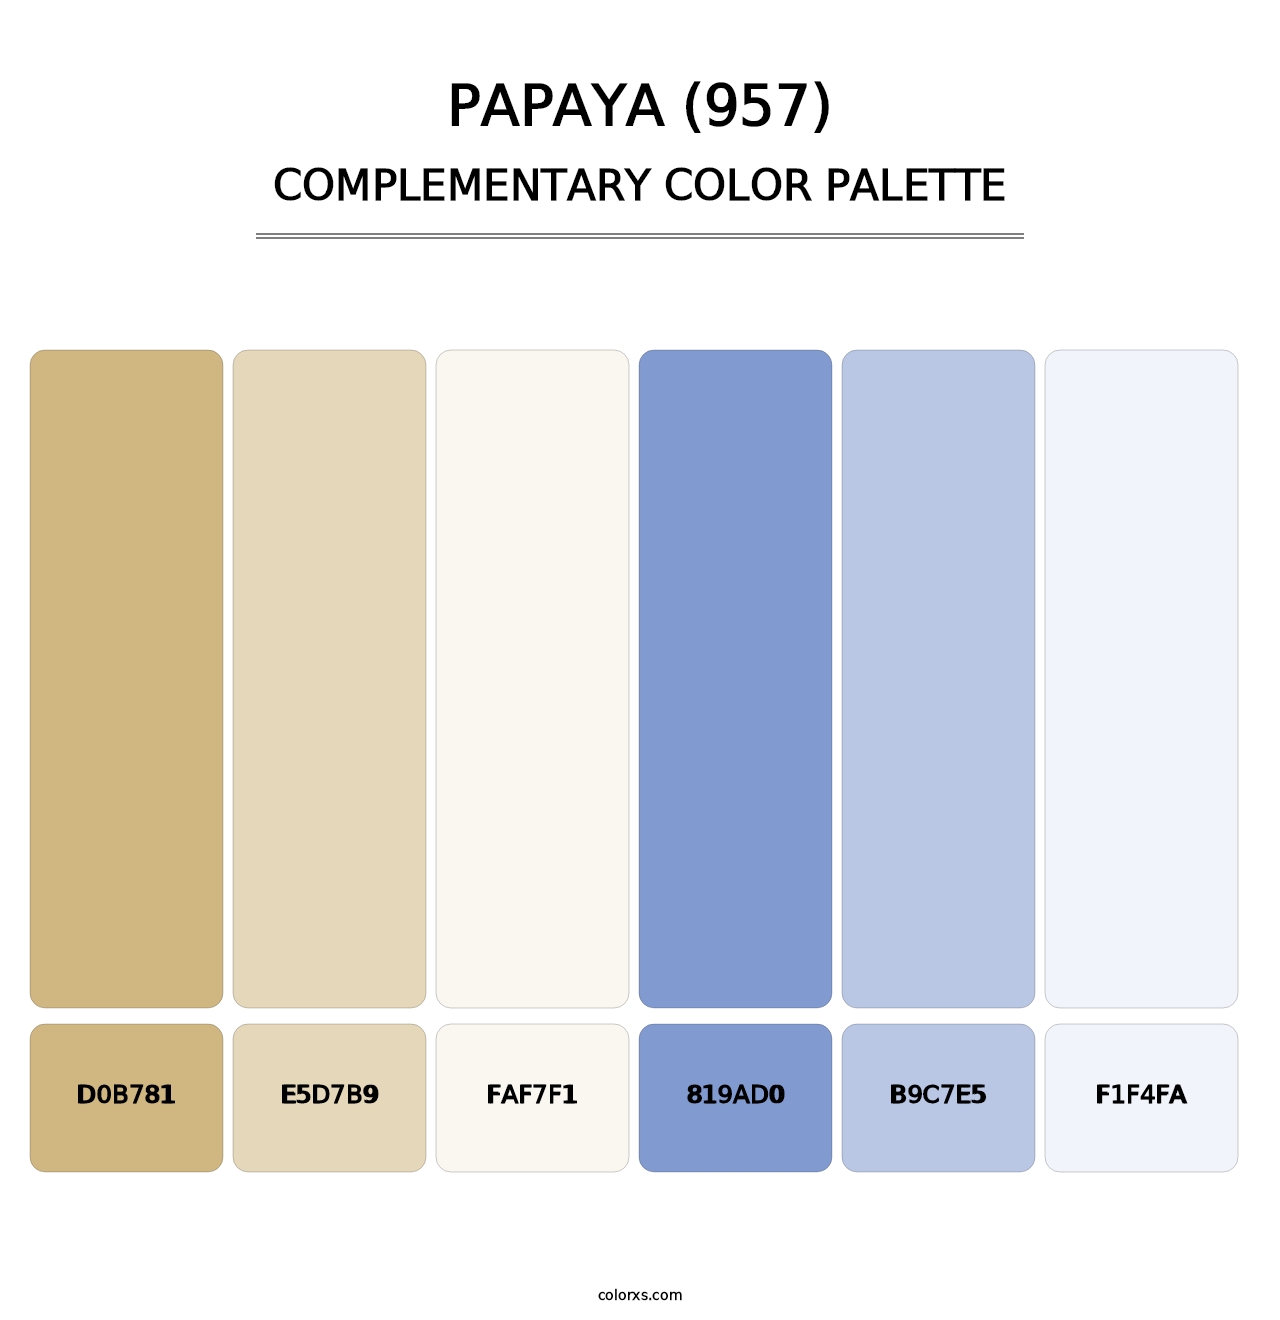 Papaya (957) - Complementary Color Palette